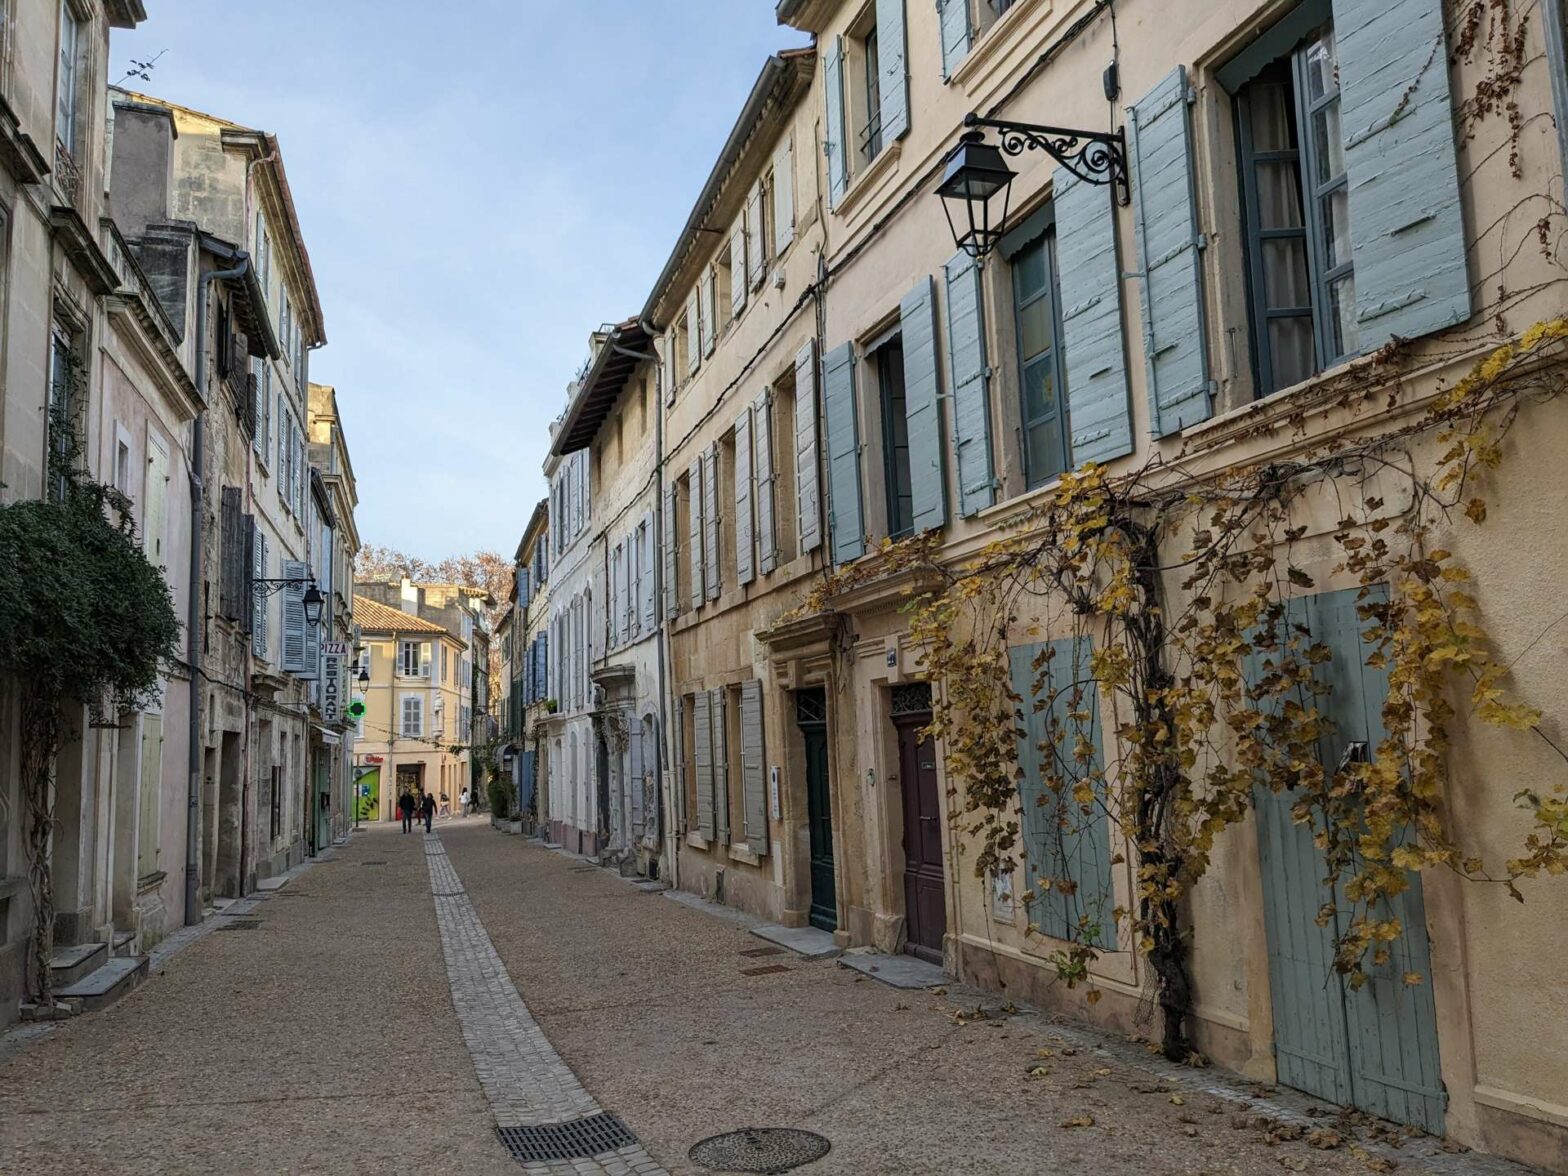 A street in Arles, Provence, southern France